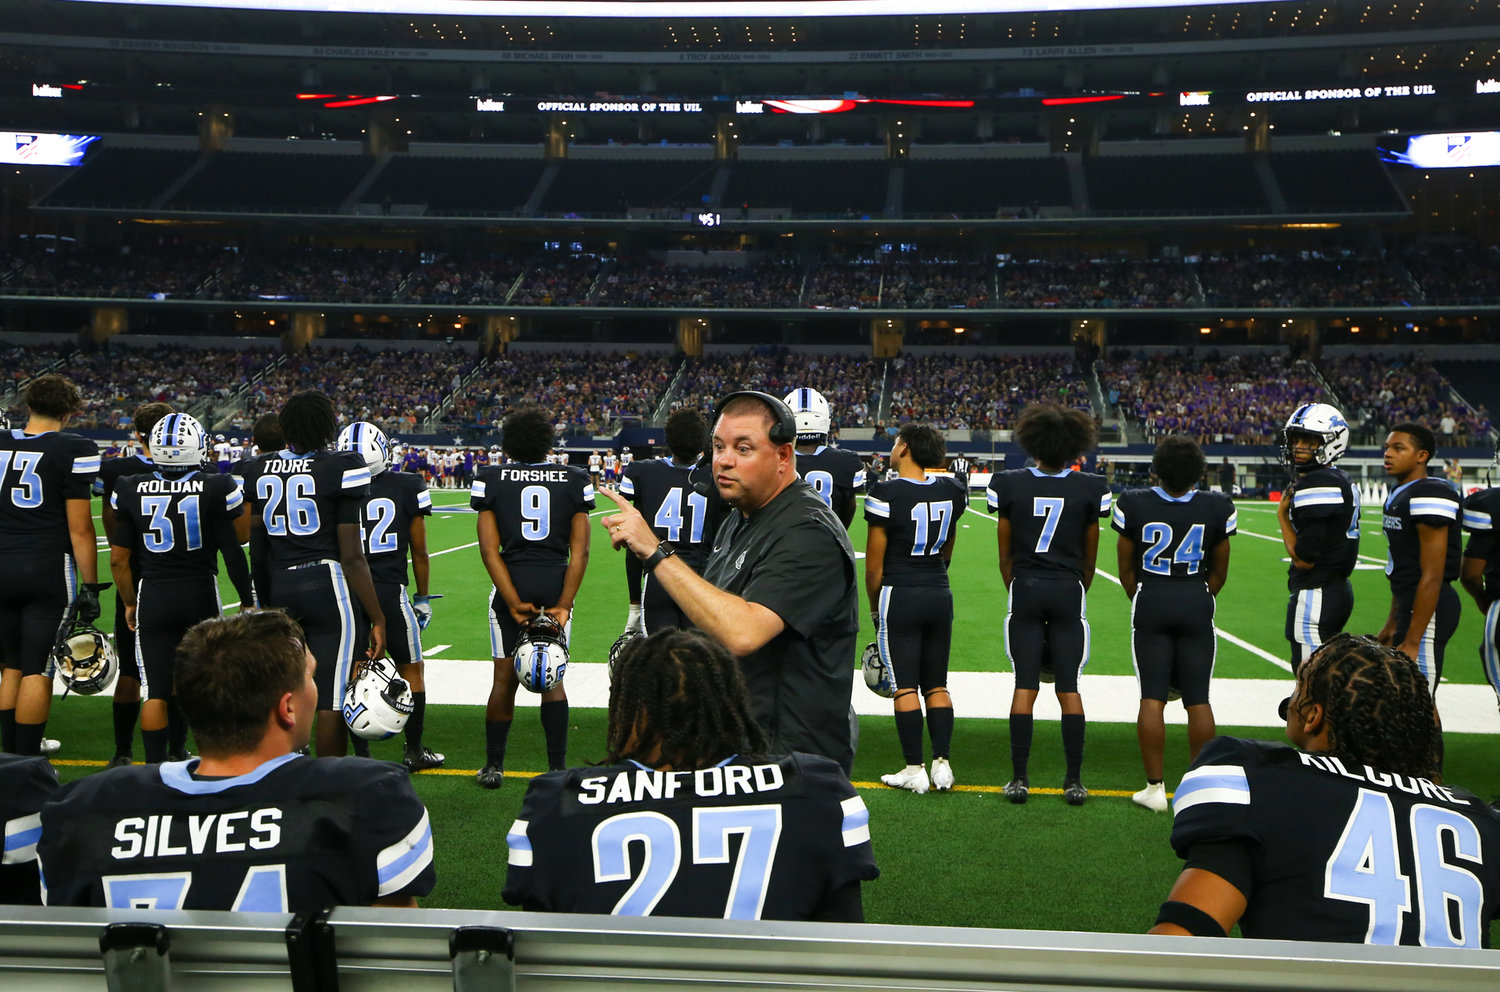 Paetow players on the sideline during the Class 5A-Division I state football championship game between Paetow and College Station on December 17, 2021 in Arlington, Texas.